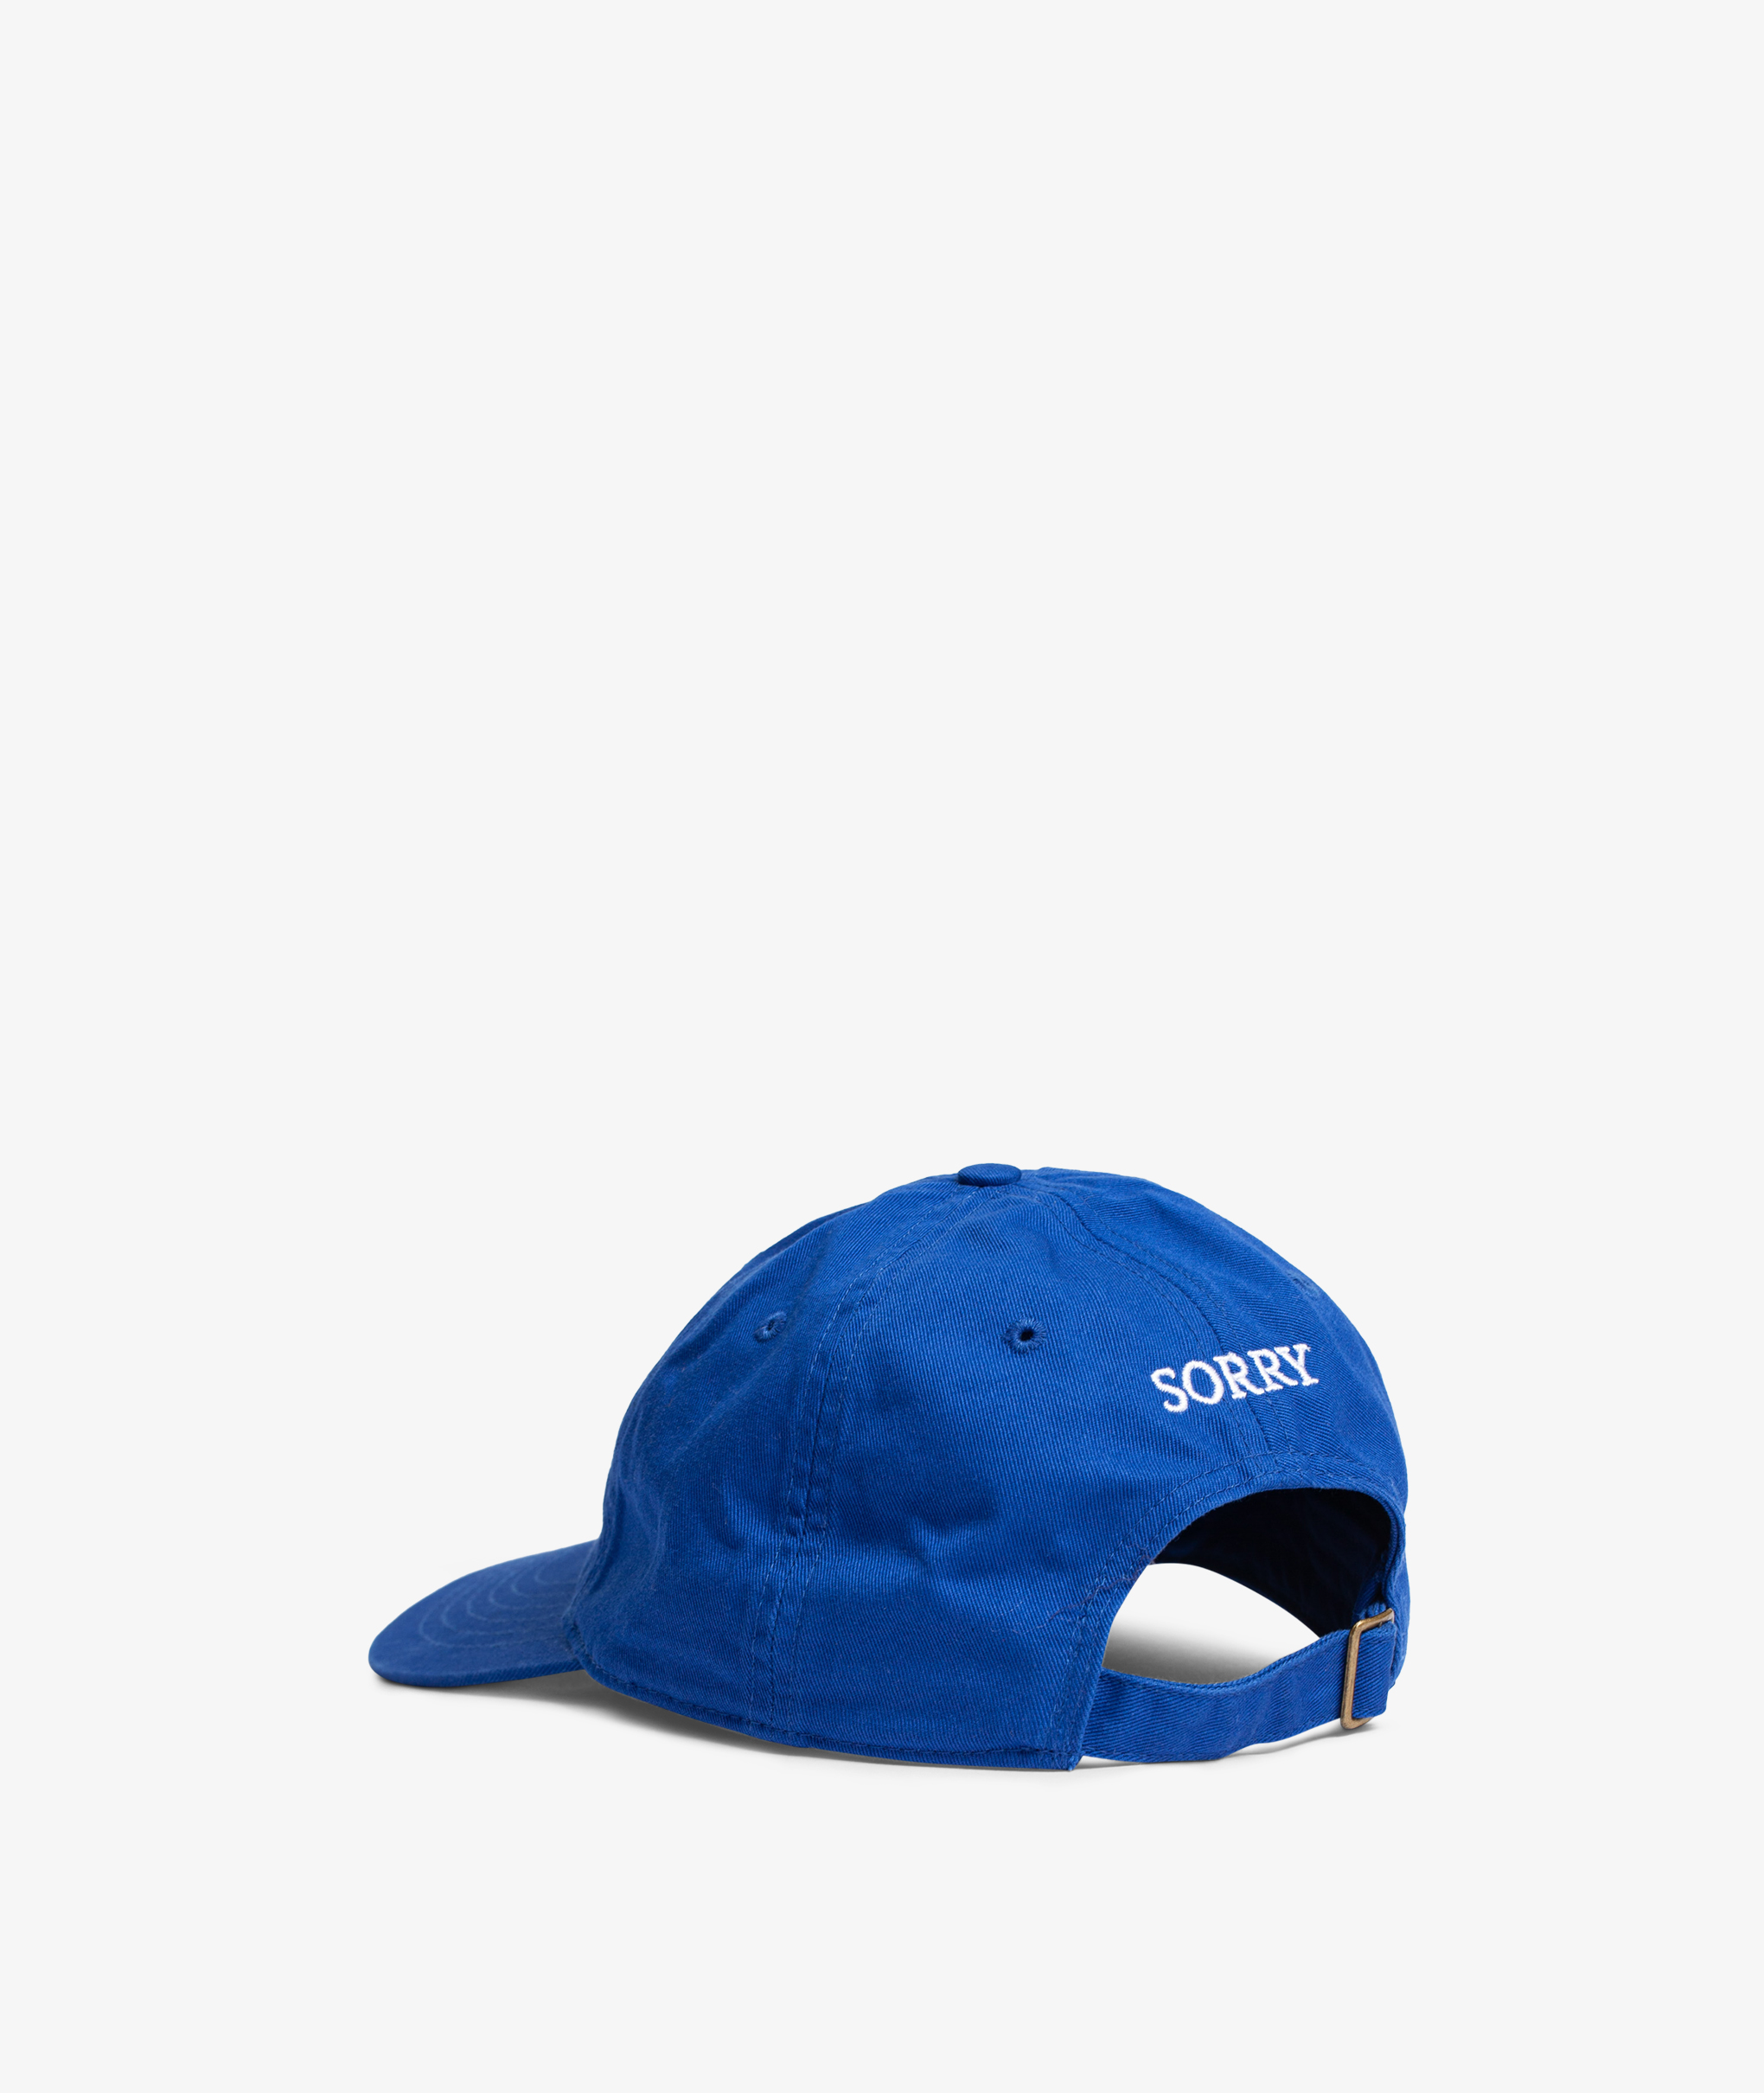 Norse Store | Shipping Worldwide - IDEA Sorry I don't work here Hat - BLUE